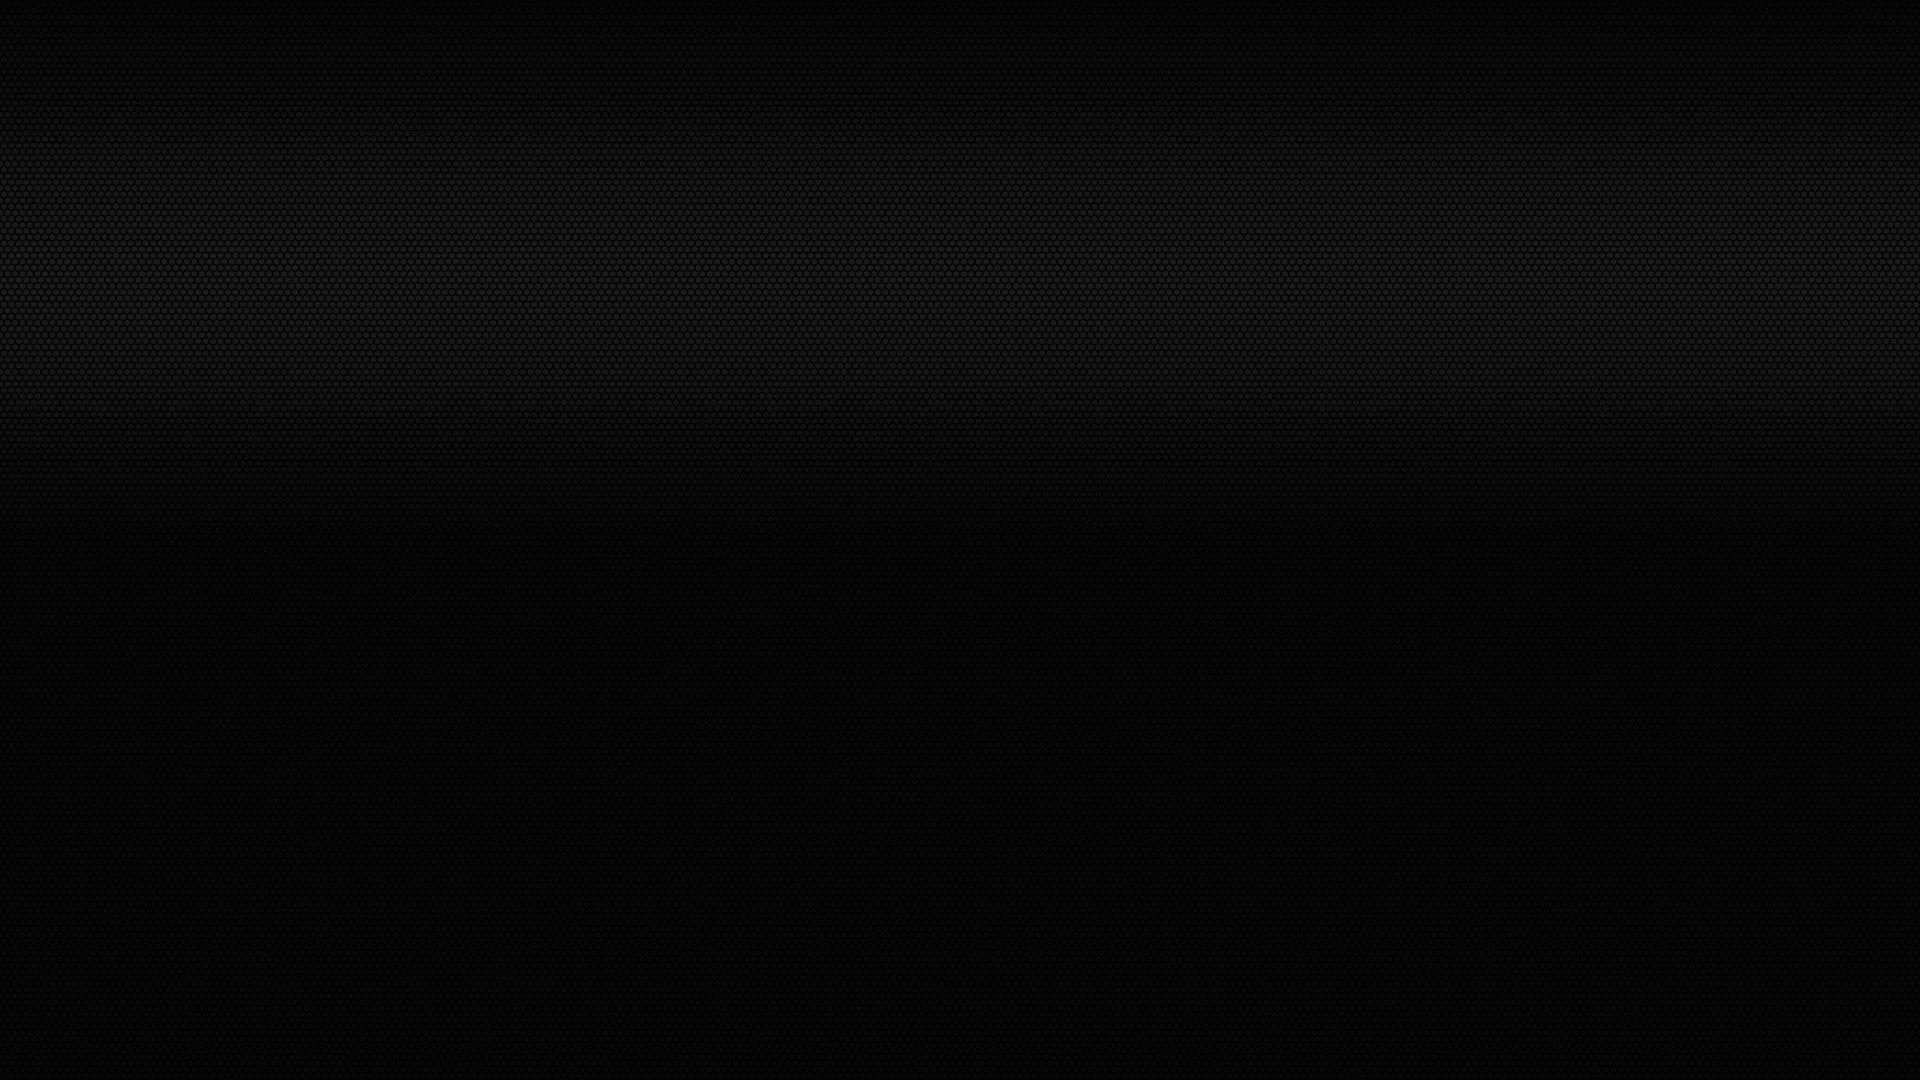 Pure Black Wallpaper Hd 1080P - Black background with text overlay